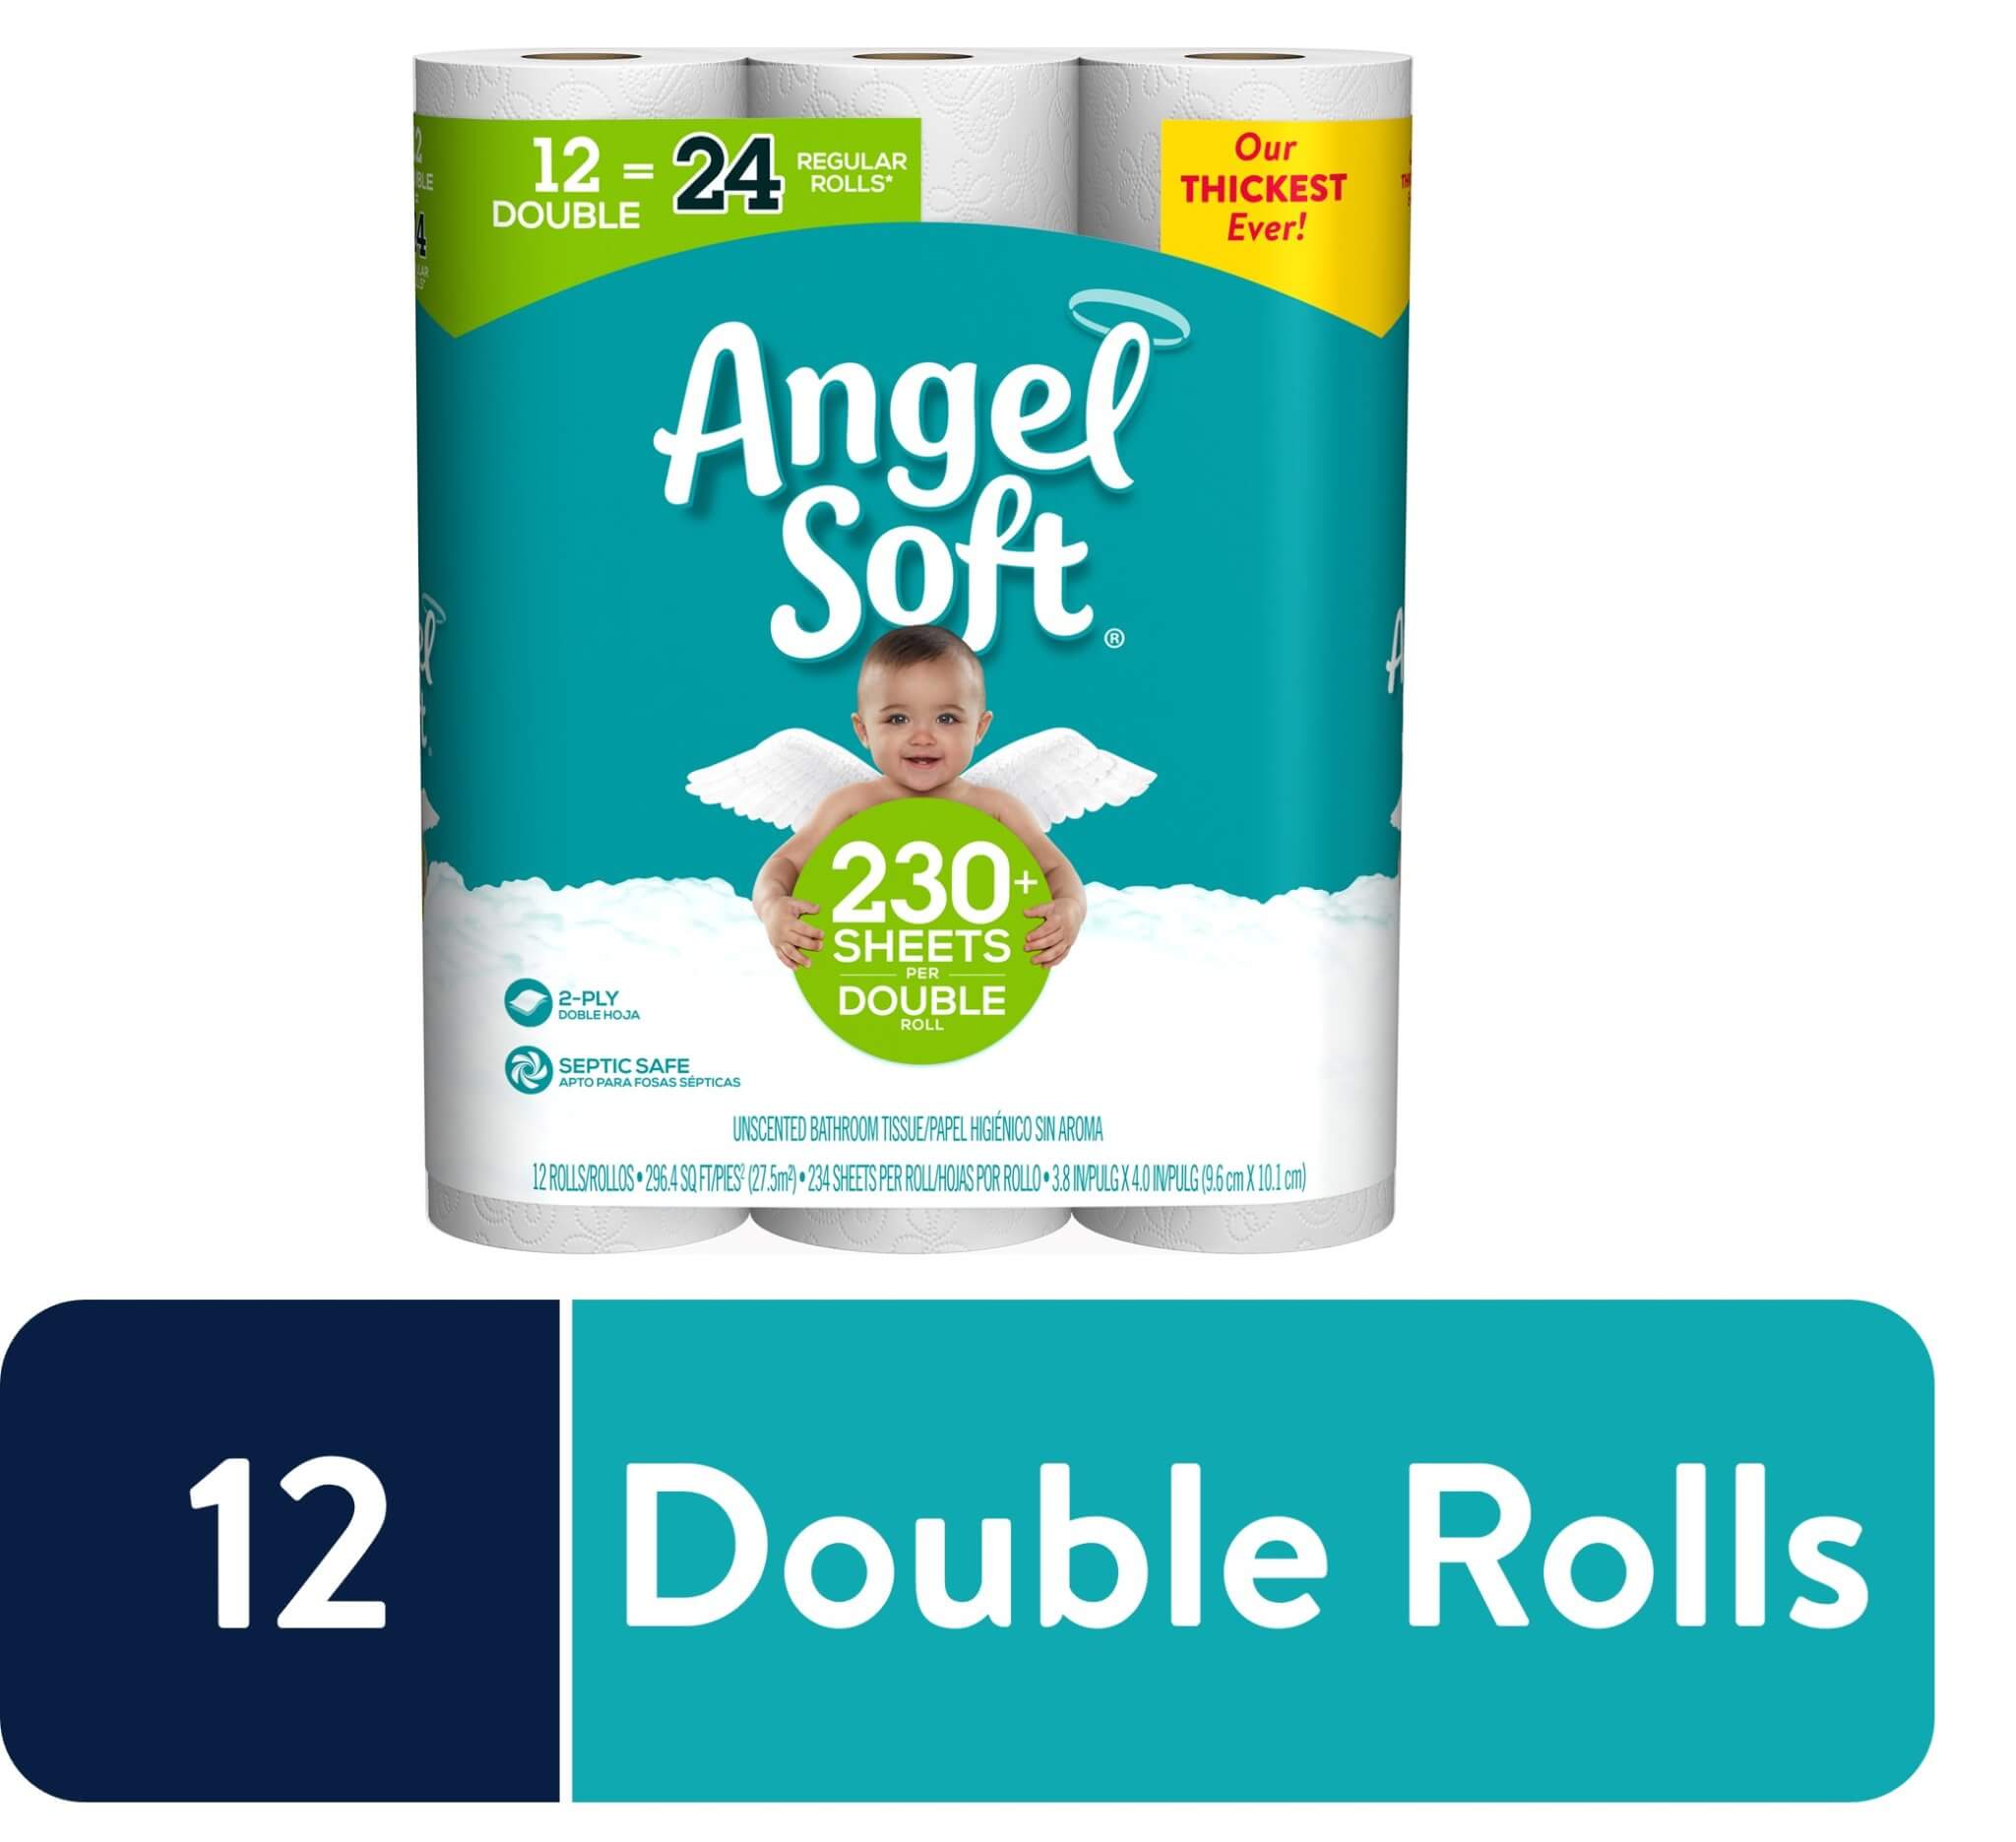 Angel Soft Toilet Paper, 12 Double Rolls ONLY $5.97